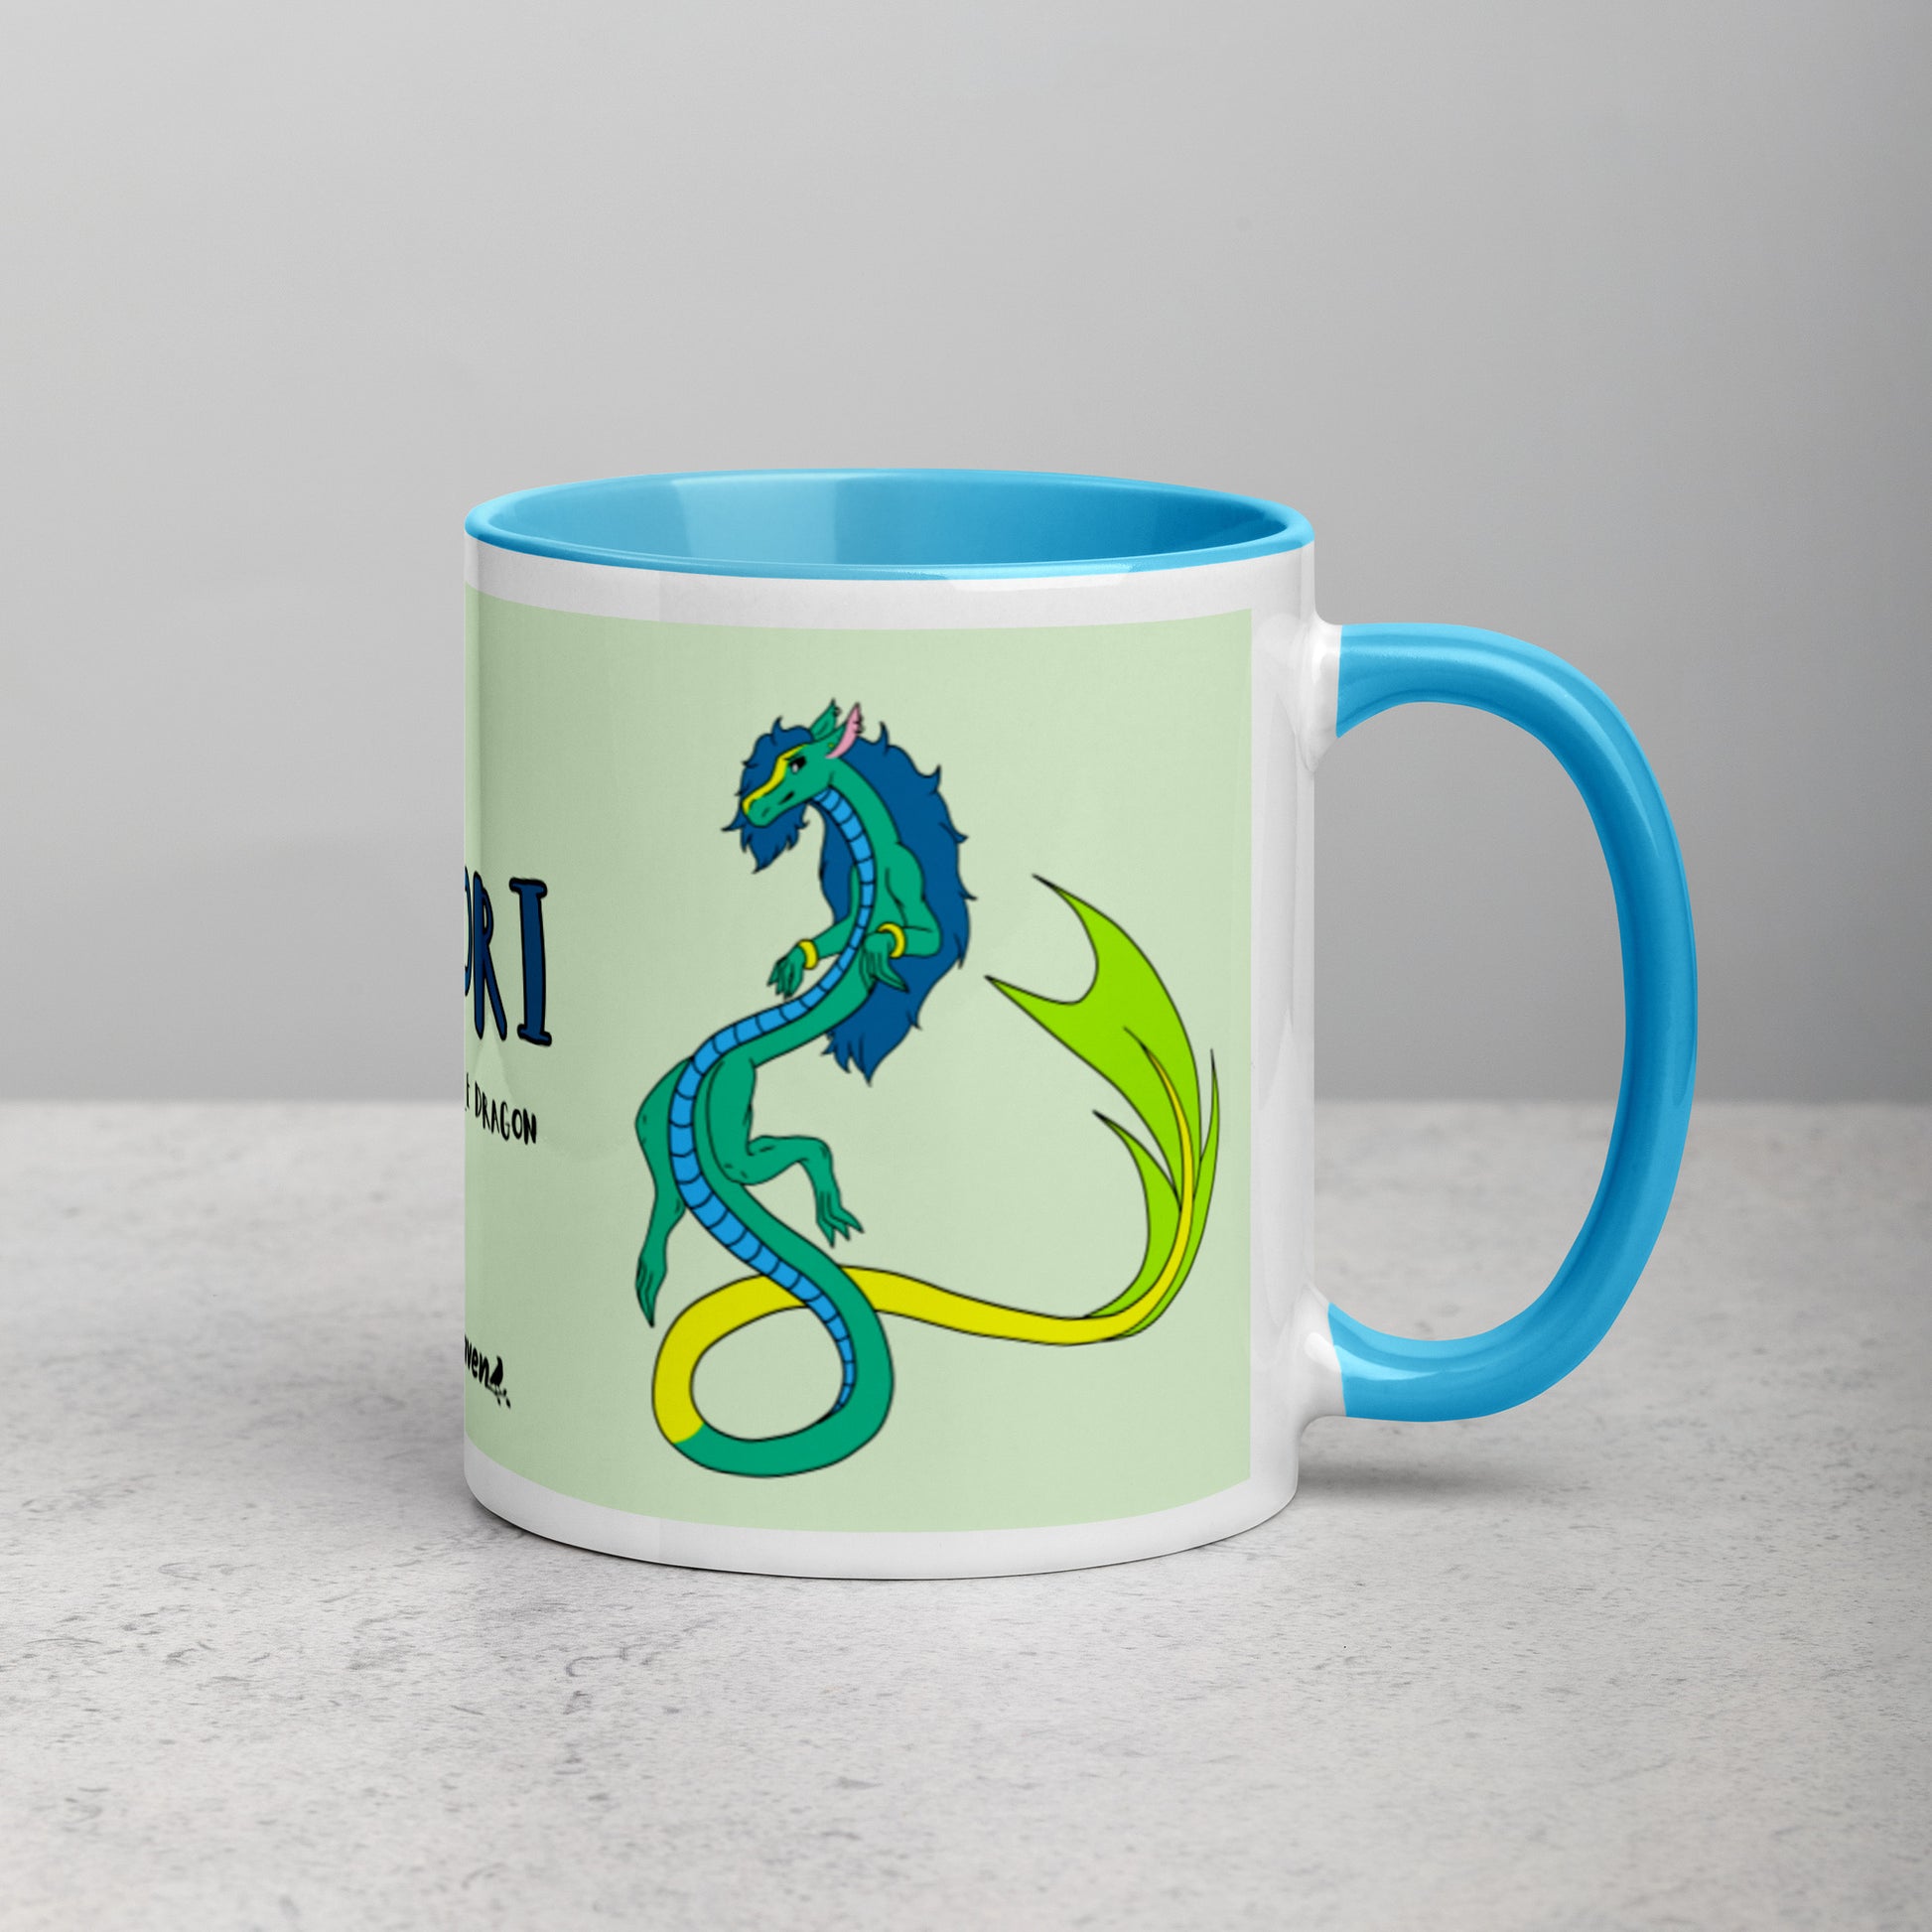 11 ounce white ceramic mug. Blue inside and handle. Features double-sided image of Mikori the Fuzzy Noodle Dragon. Shown on tabletop with handle facing right.